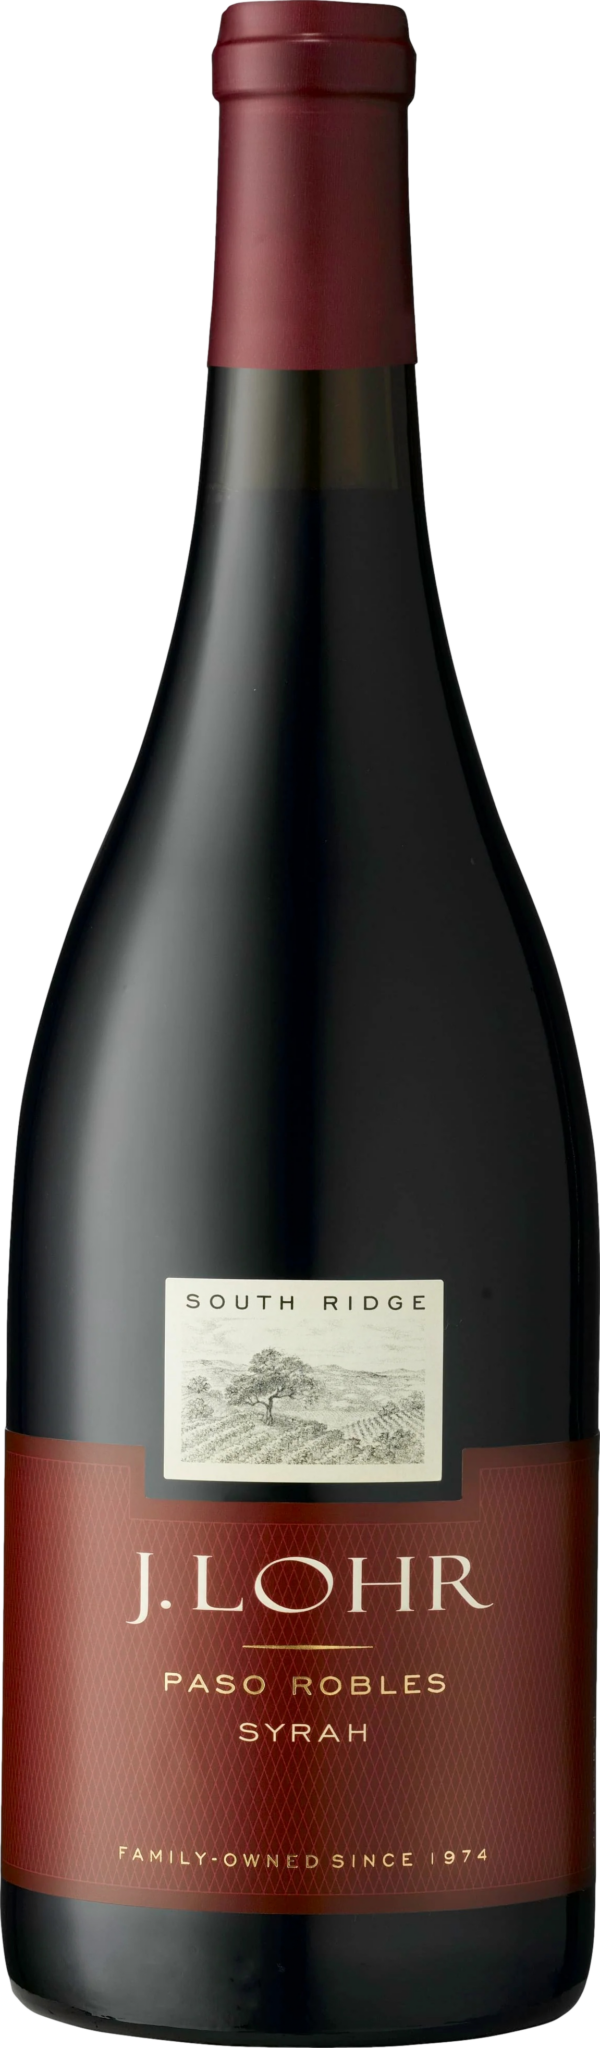 Product image of J. Lohr South Ridge Syrah 2019 from 8wines